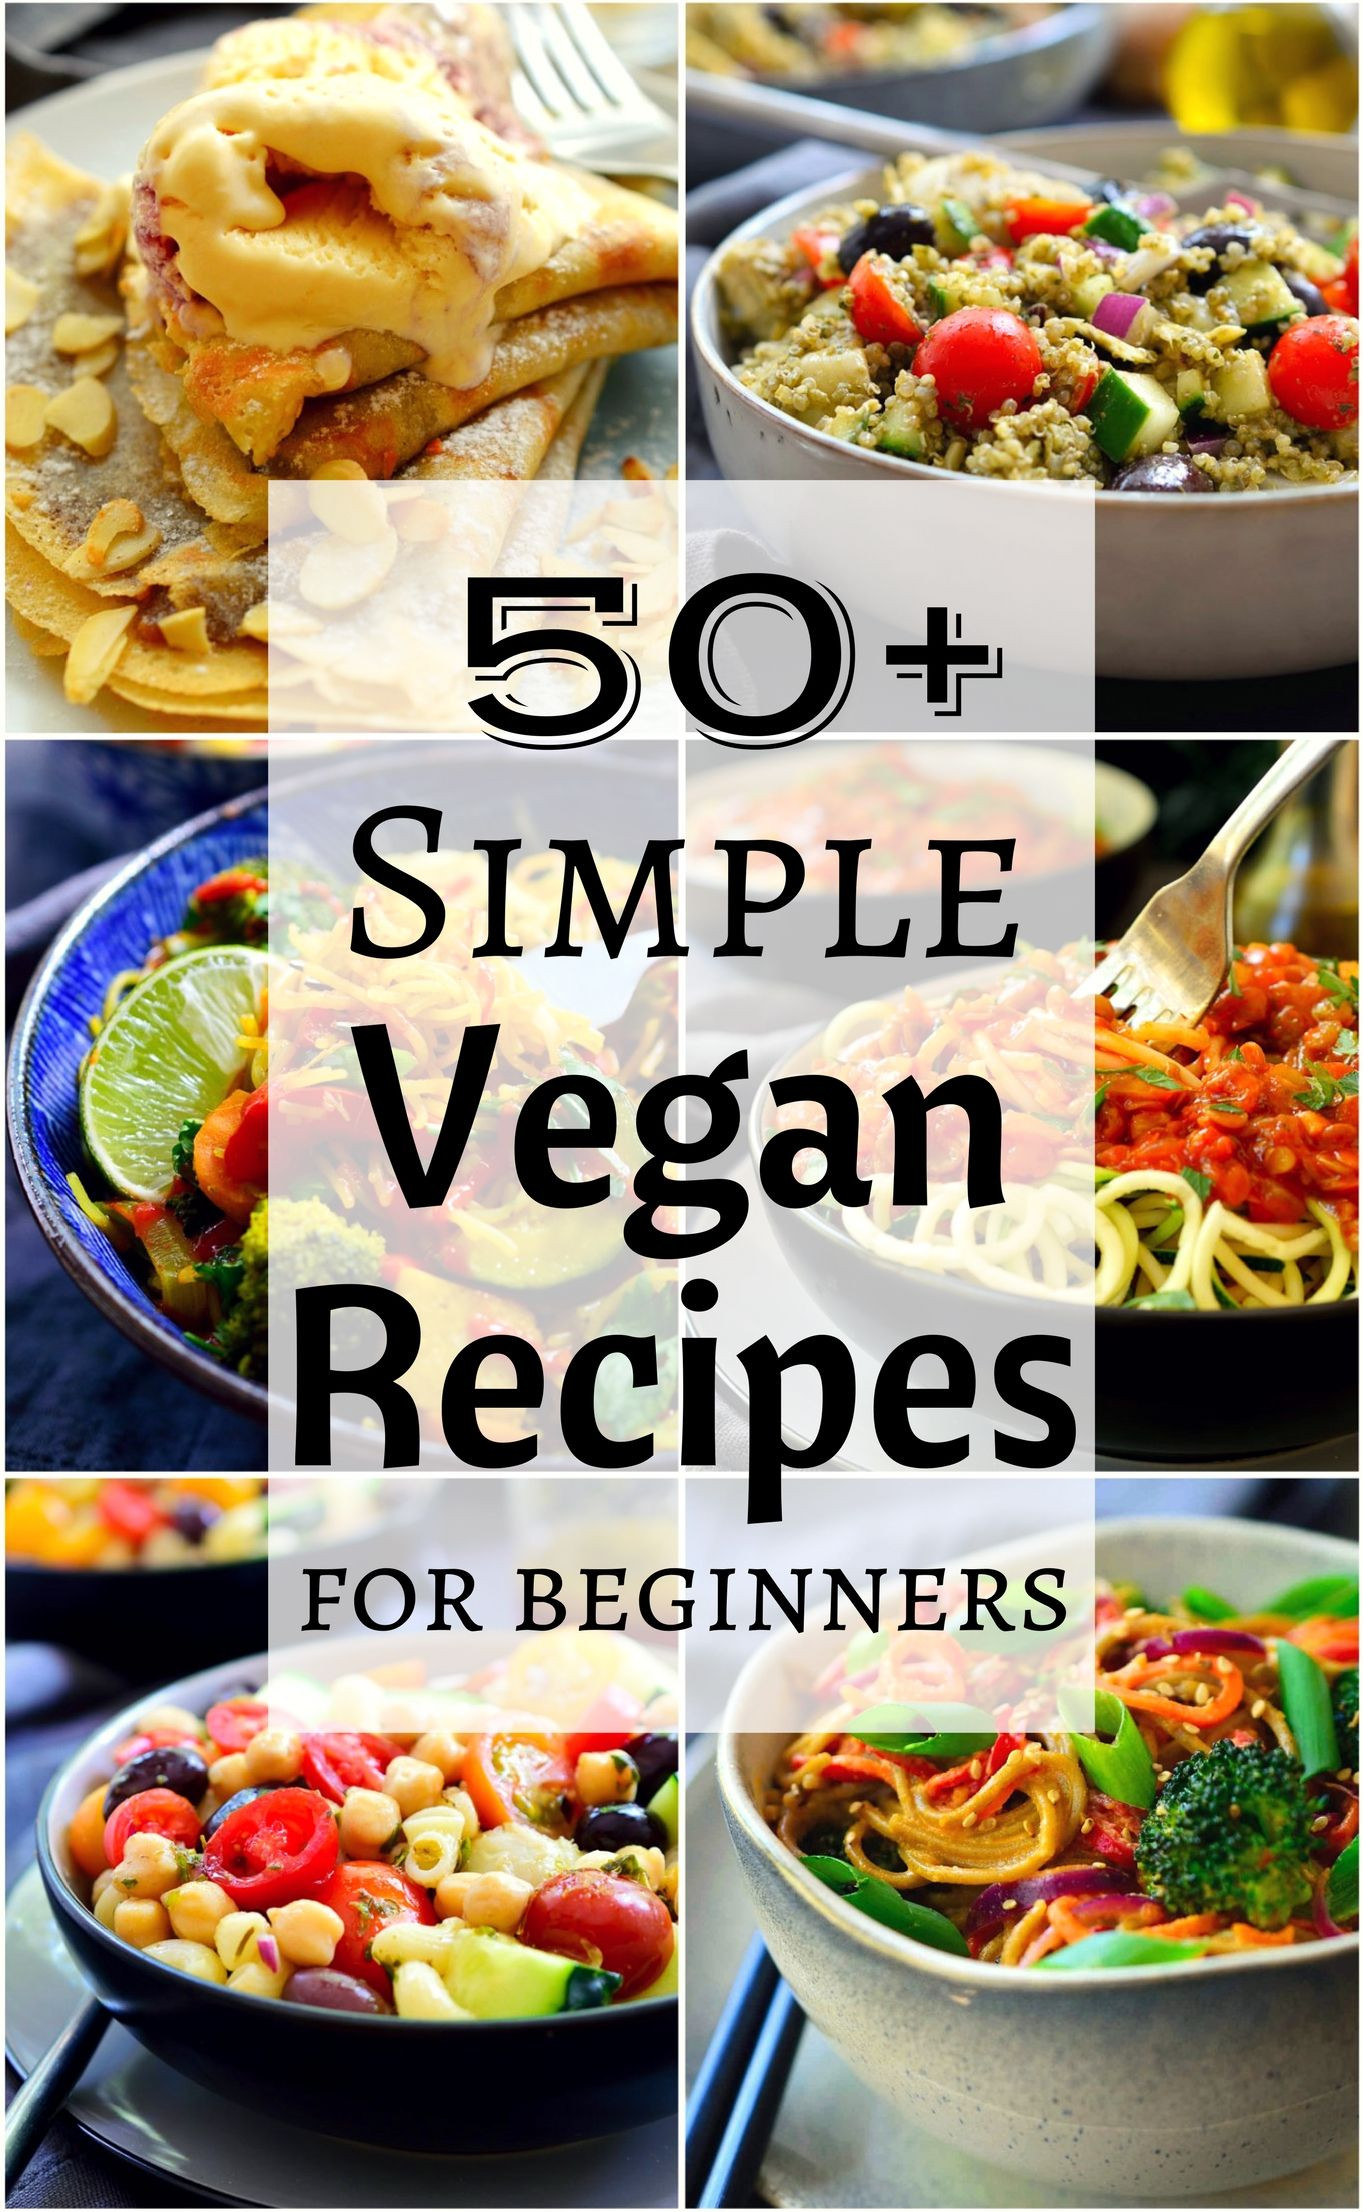 Easy Cheap Vegetarian Recipes
 We’ve scoured the web to find 50 of the best simple vegan